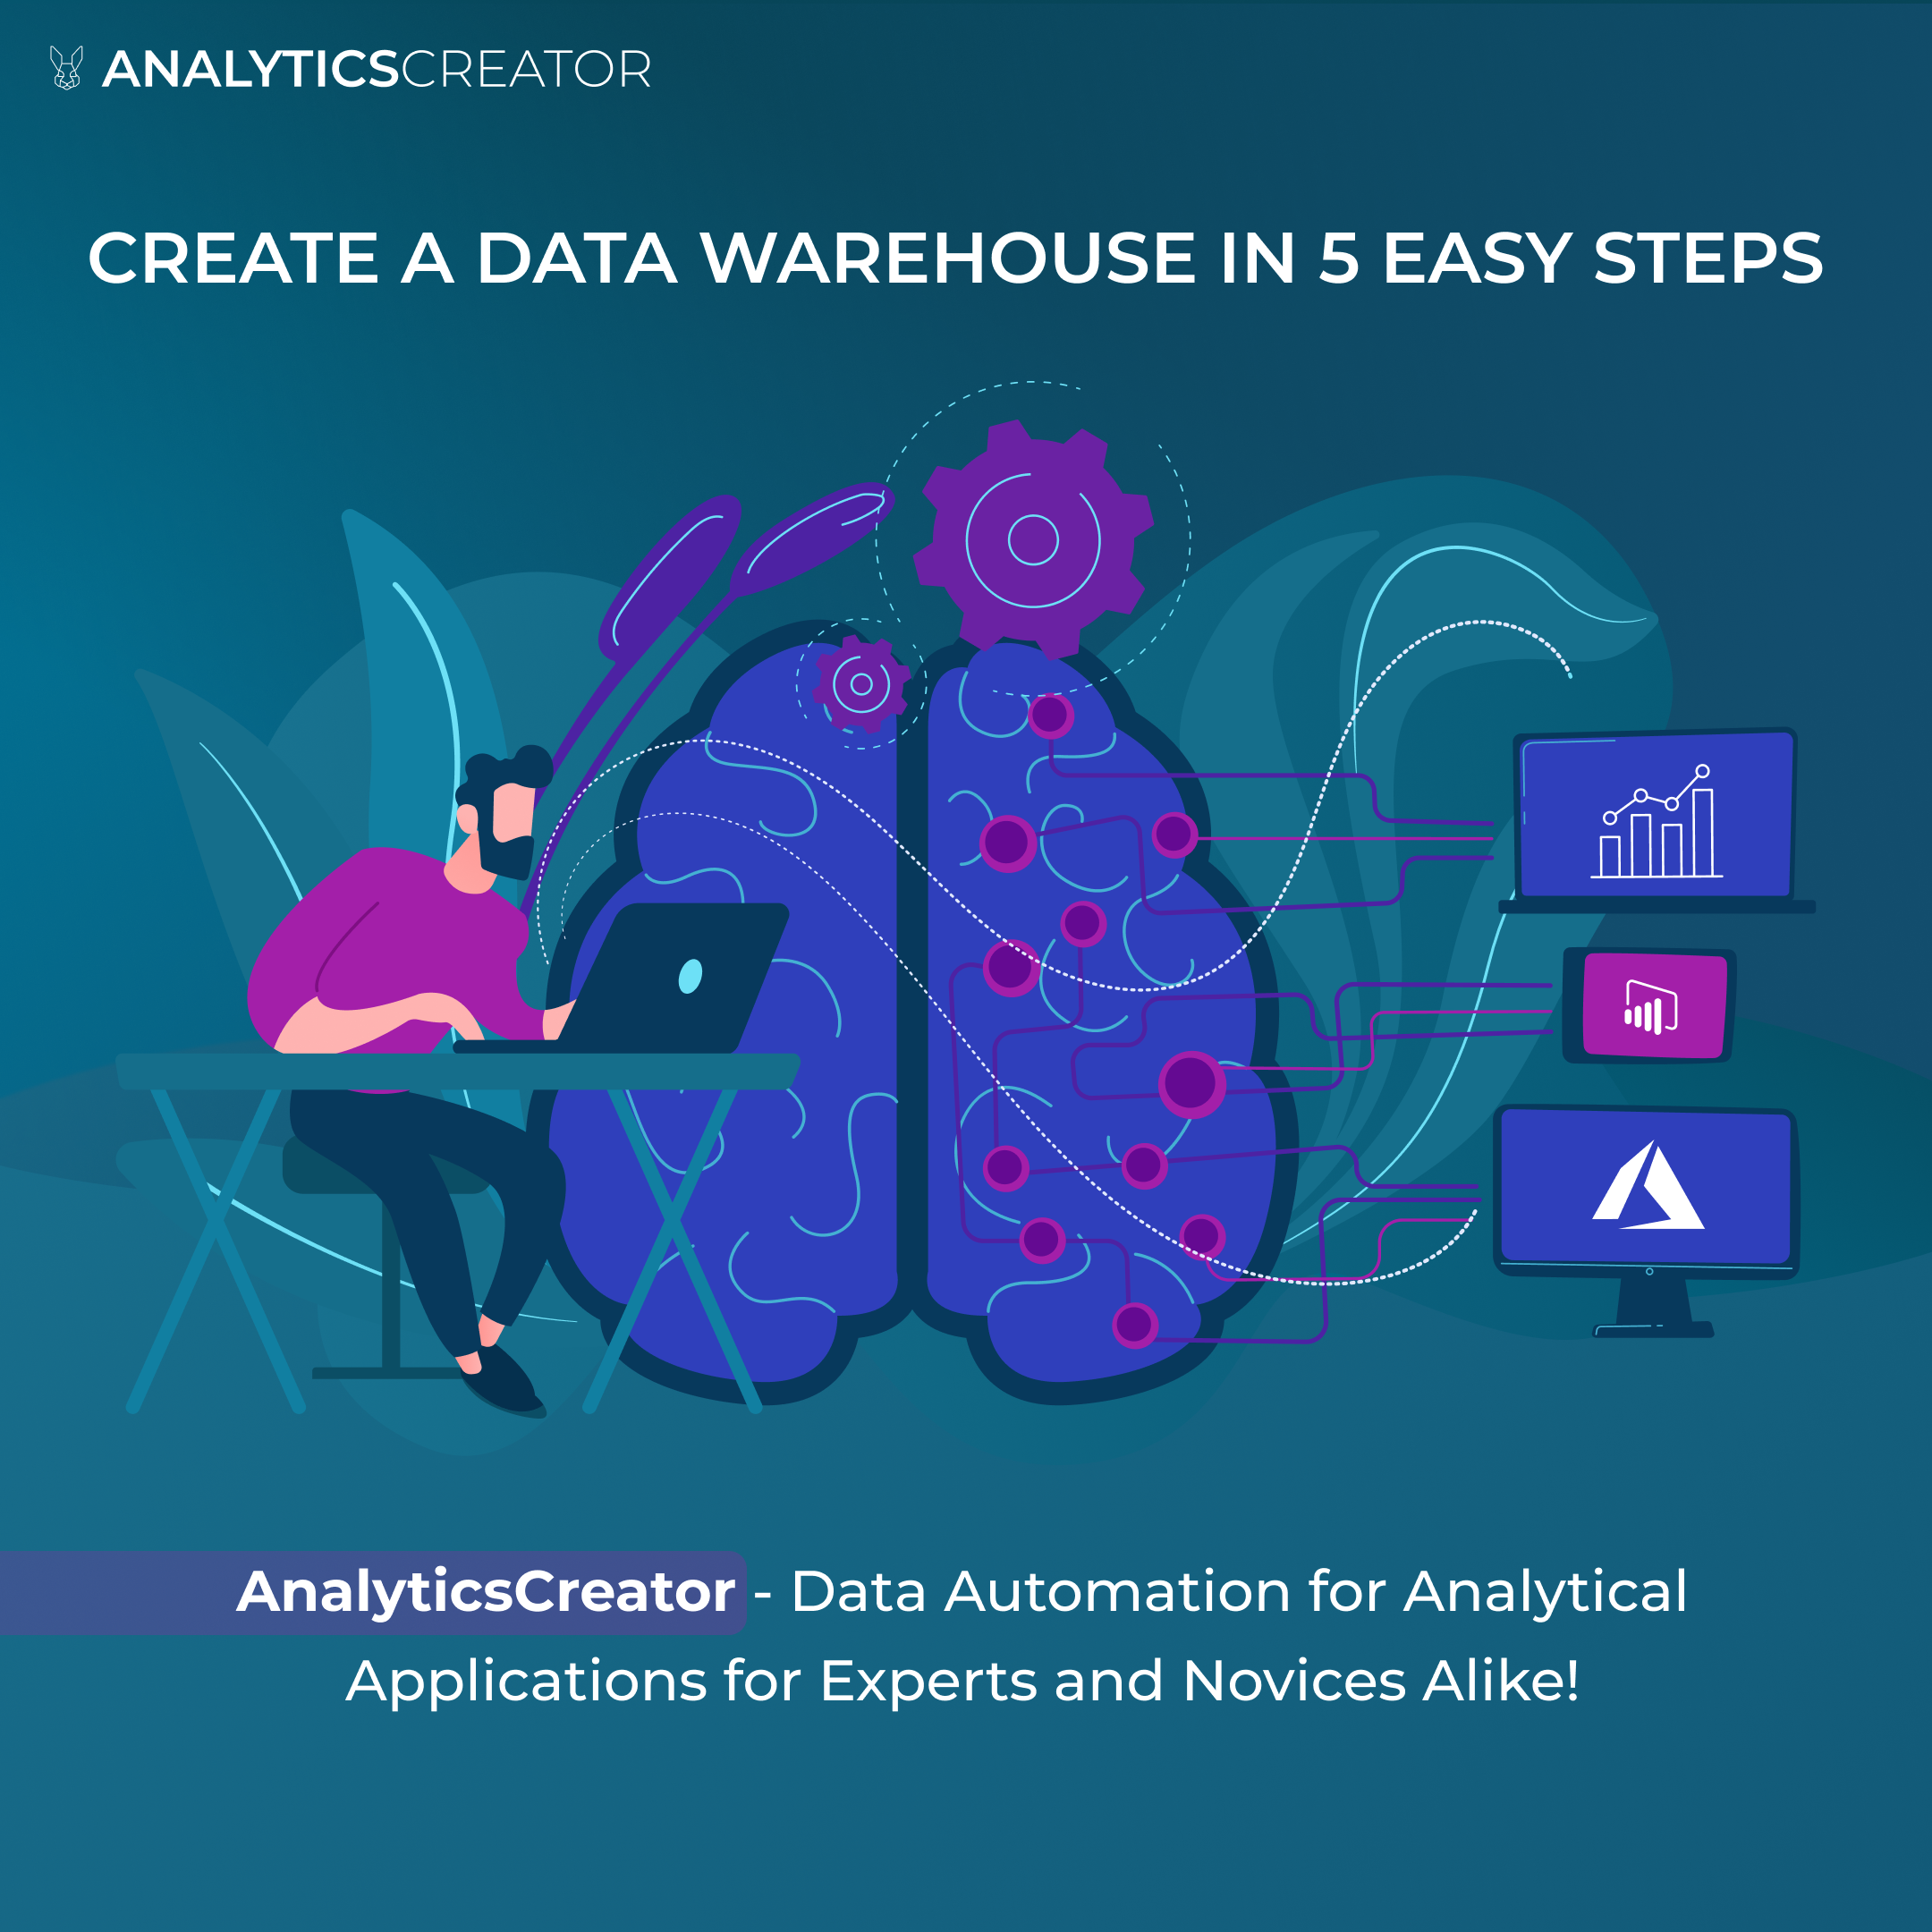 Create a Data Warehouse in 5 Easy Steps